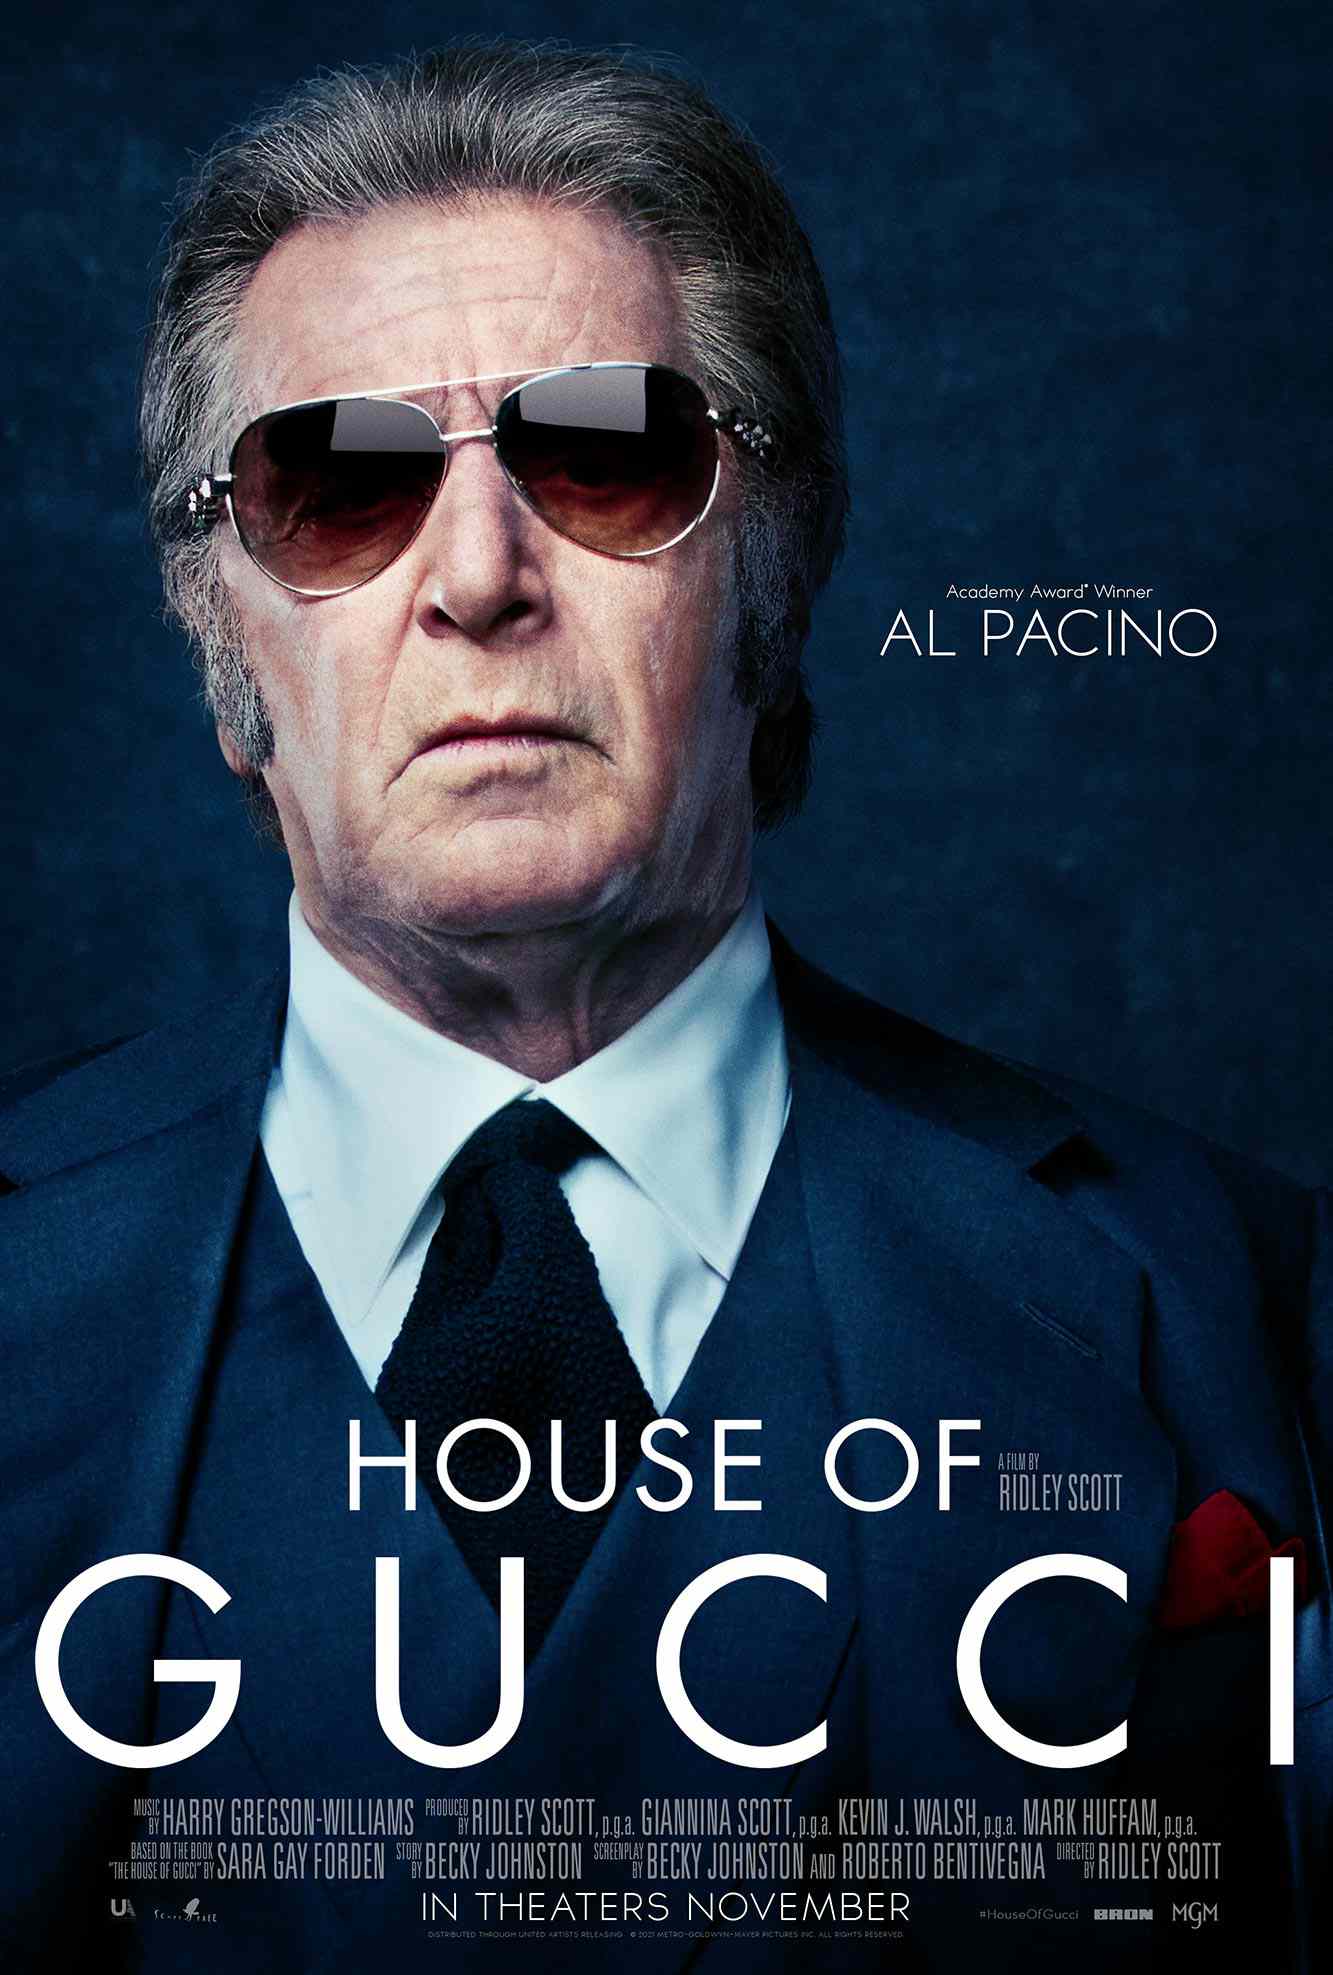 House of Gucci character posters